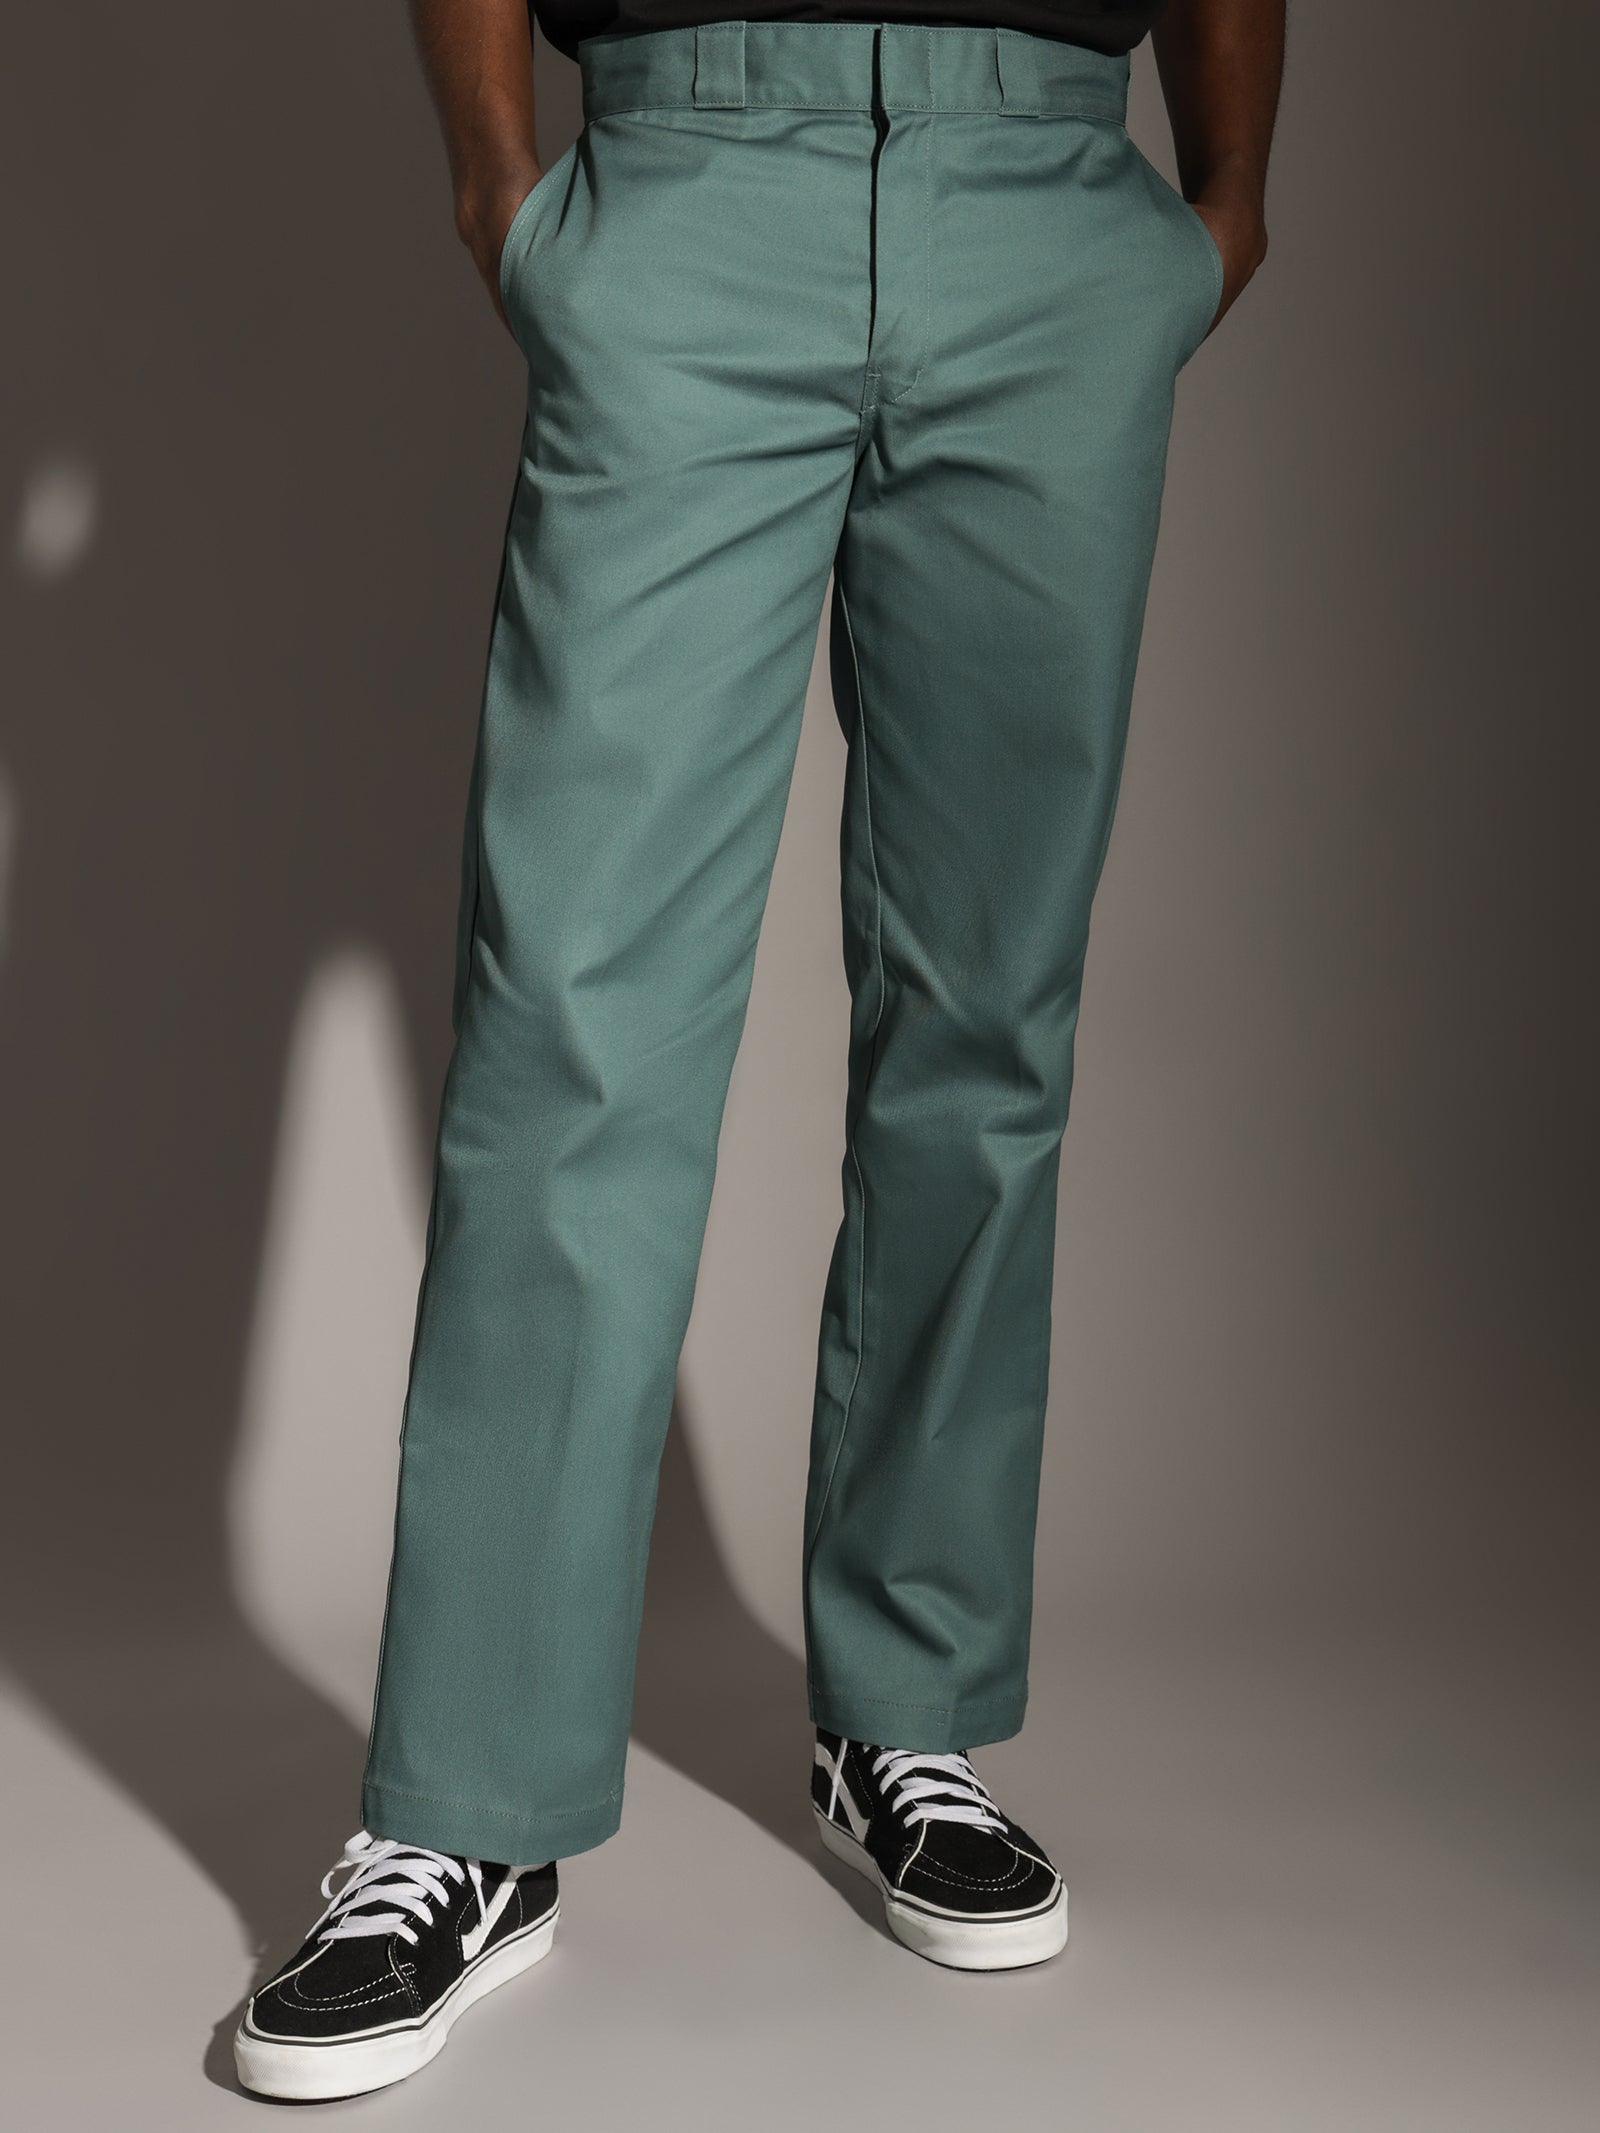 Dickies 874 Flex Work Pant - Lincoln Green – Route One